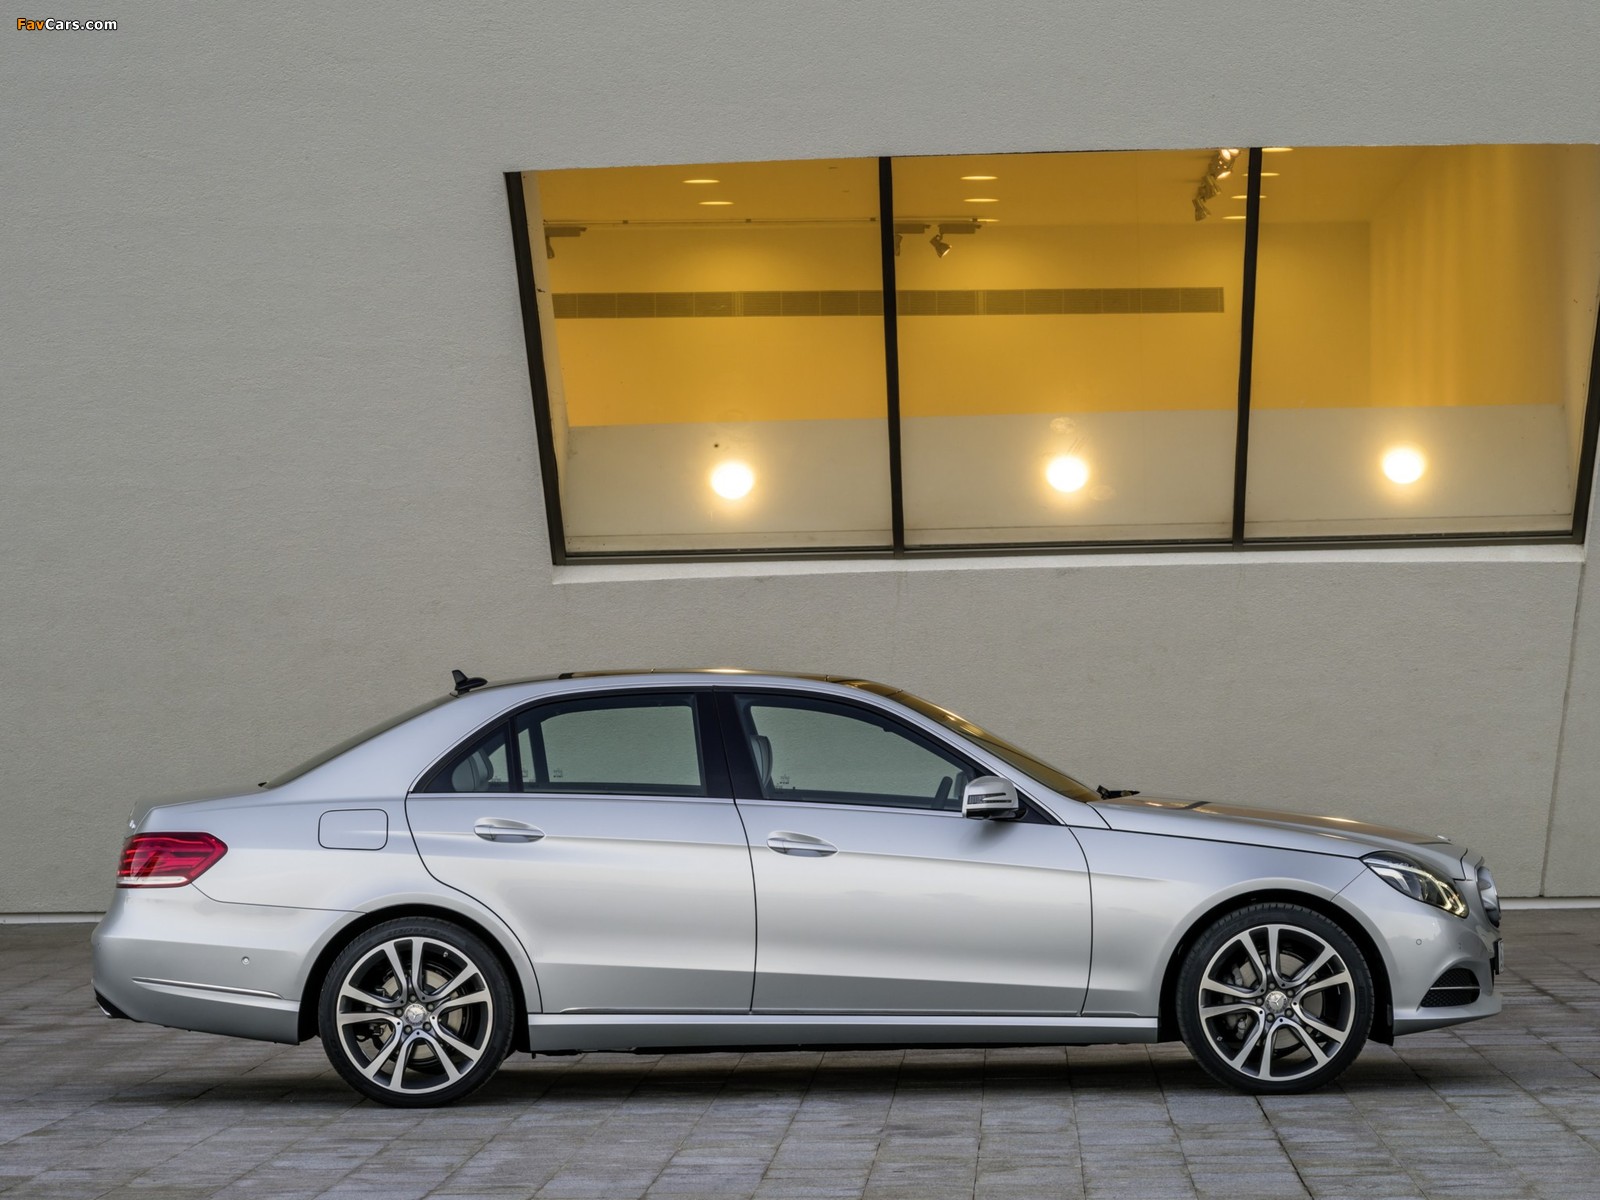 Mercedes-Benz E 350 4MATIC (W212) 2013 pictures (1600 x 1200)